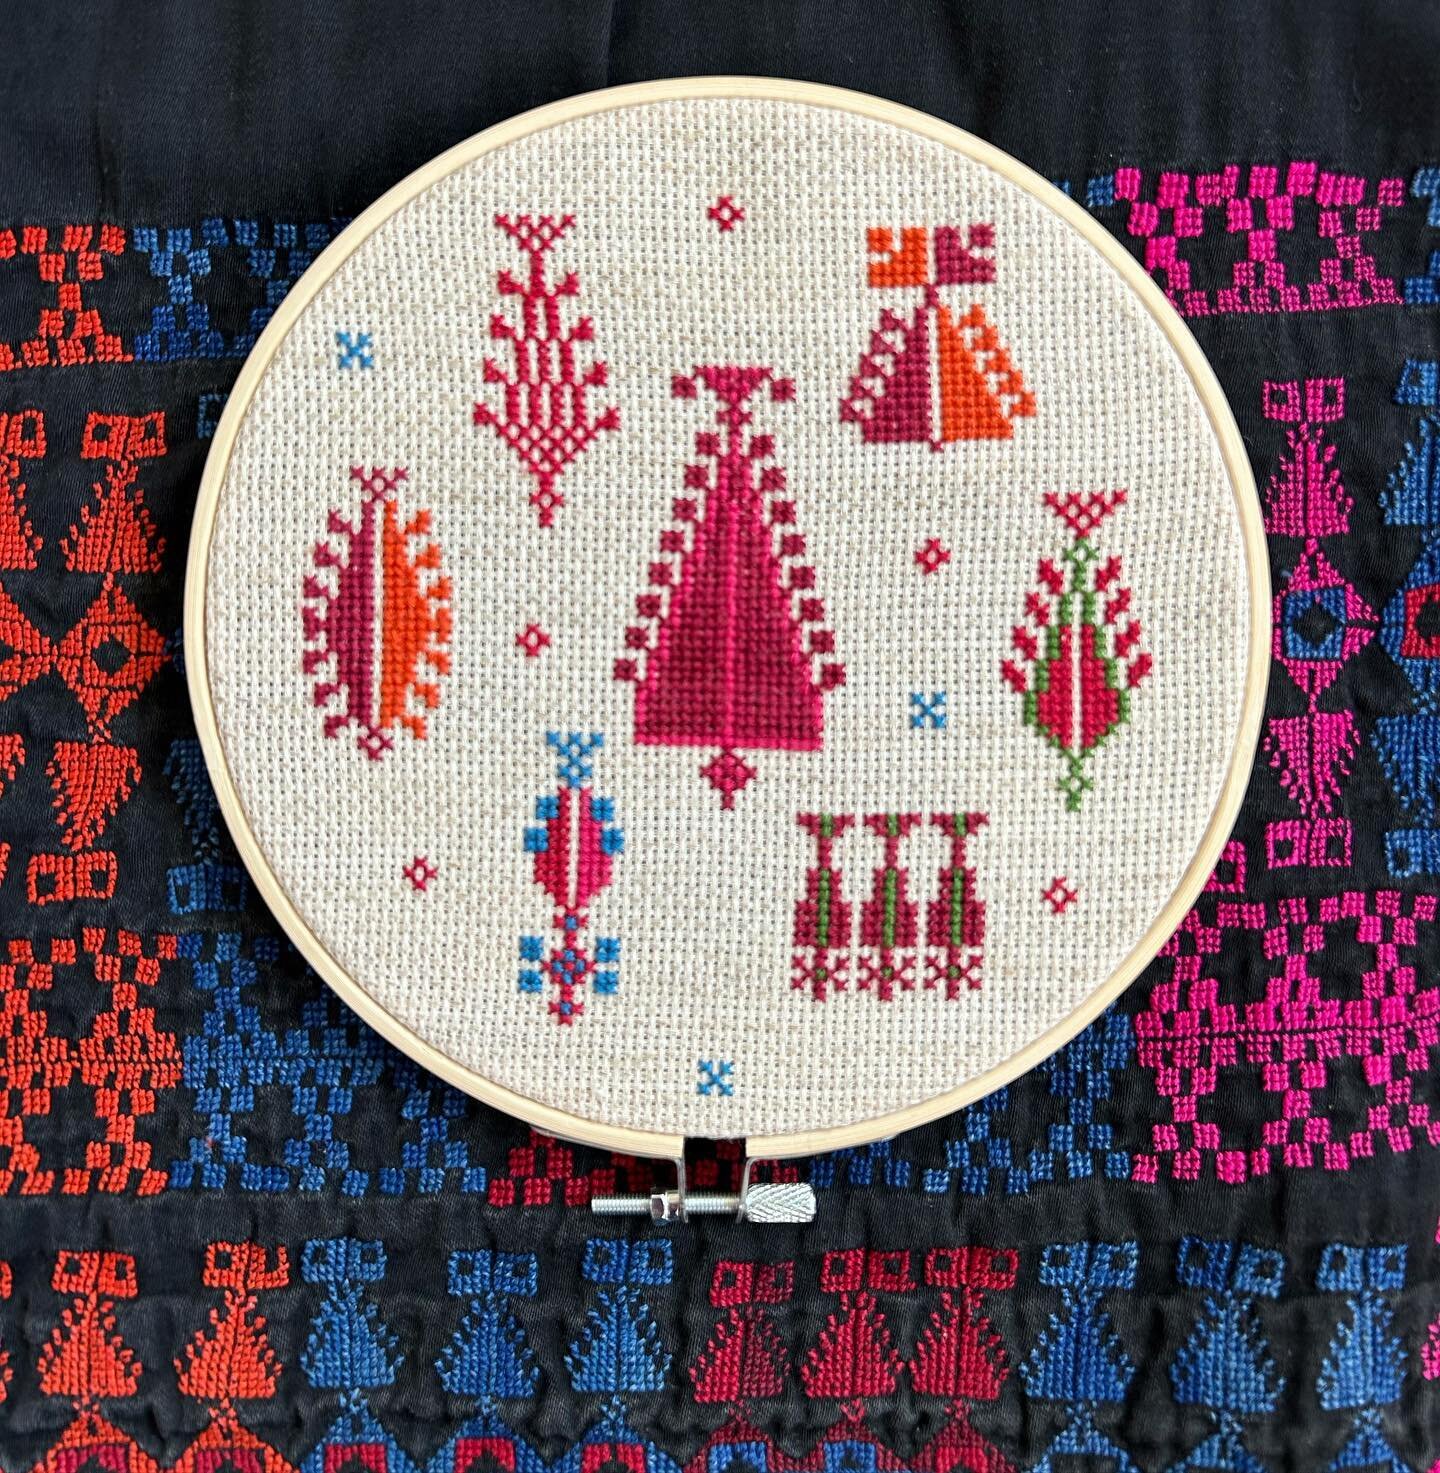 Trees of Palestine embroidery kit for beginners, intermediate level. 

Now available on our site folkglory.com (worldwide shipping) and @tirazcentre and @rummancollective in Amman Jordan.

The Cypress Tree was the most important and widespread motif 